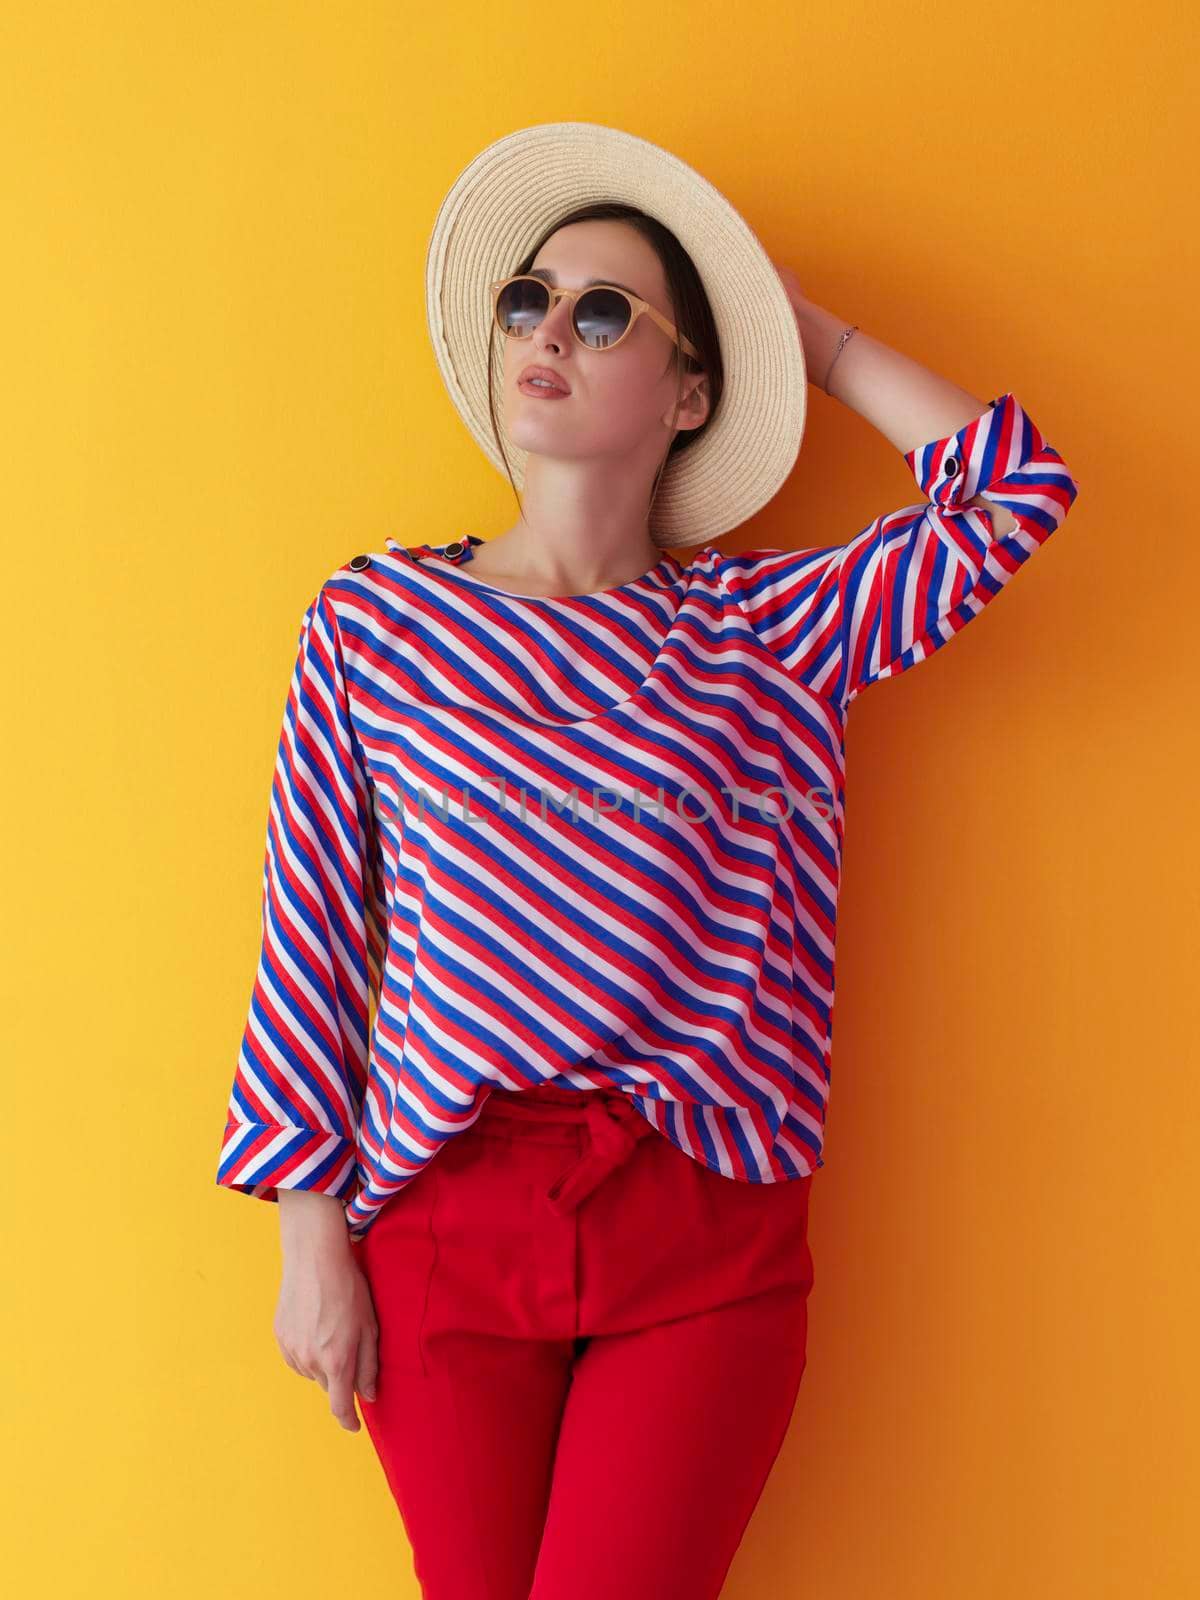 Portrait of young woman wearing sunglasses and hat over a yellow background. Female model posing in the studio. Concept of fashion